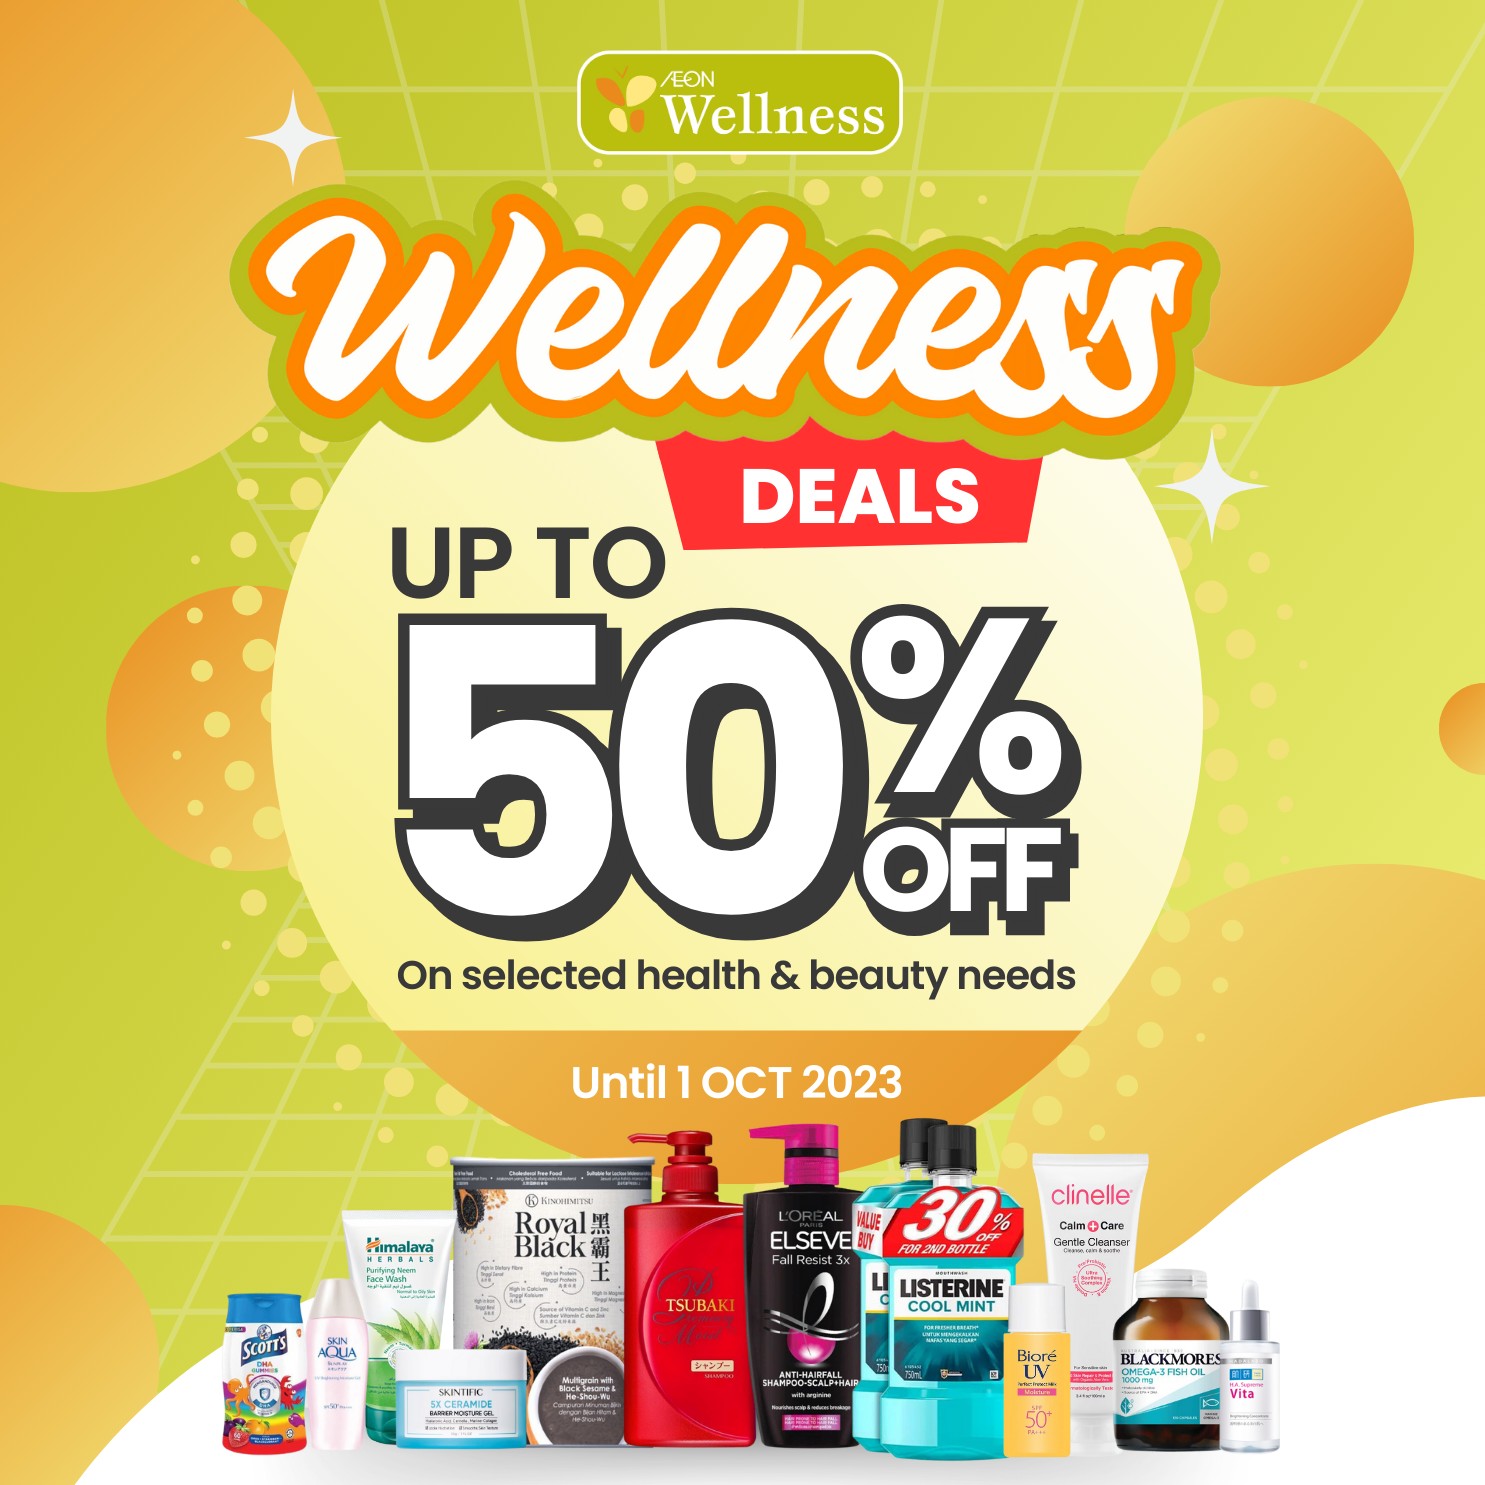 Enjoy up to 50% off exclusive Health & Beauty Products